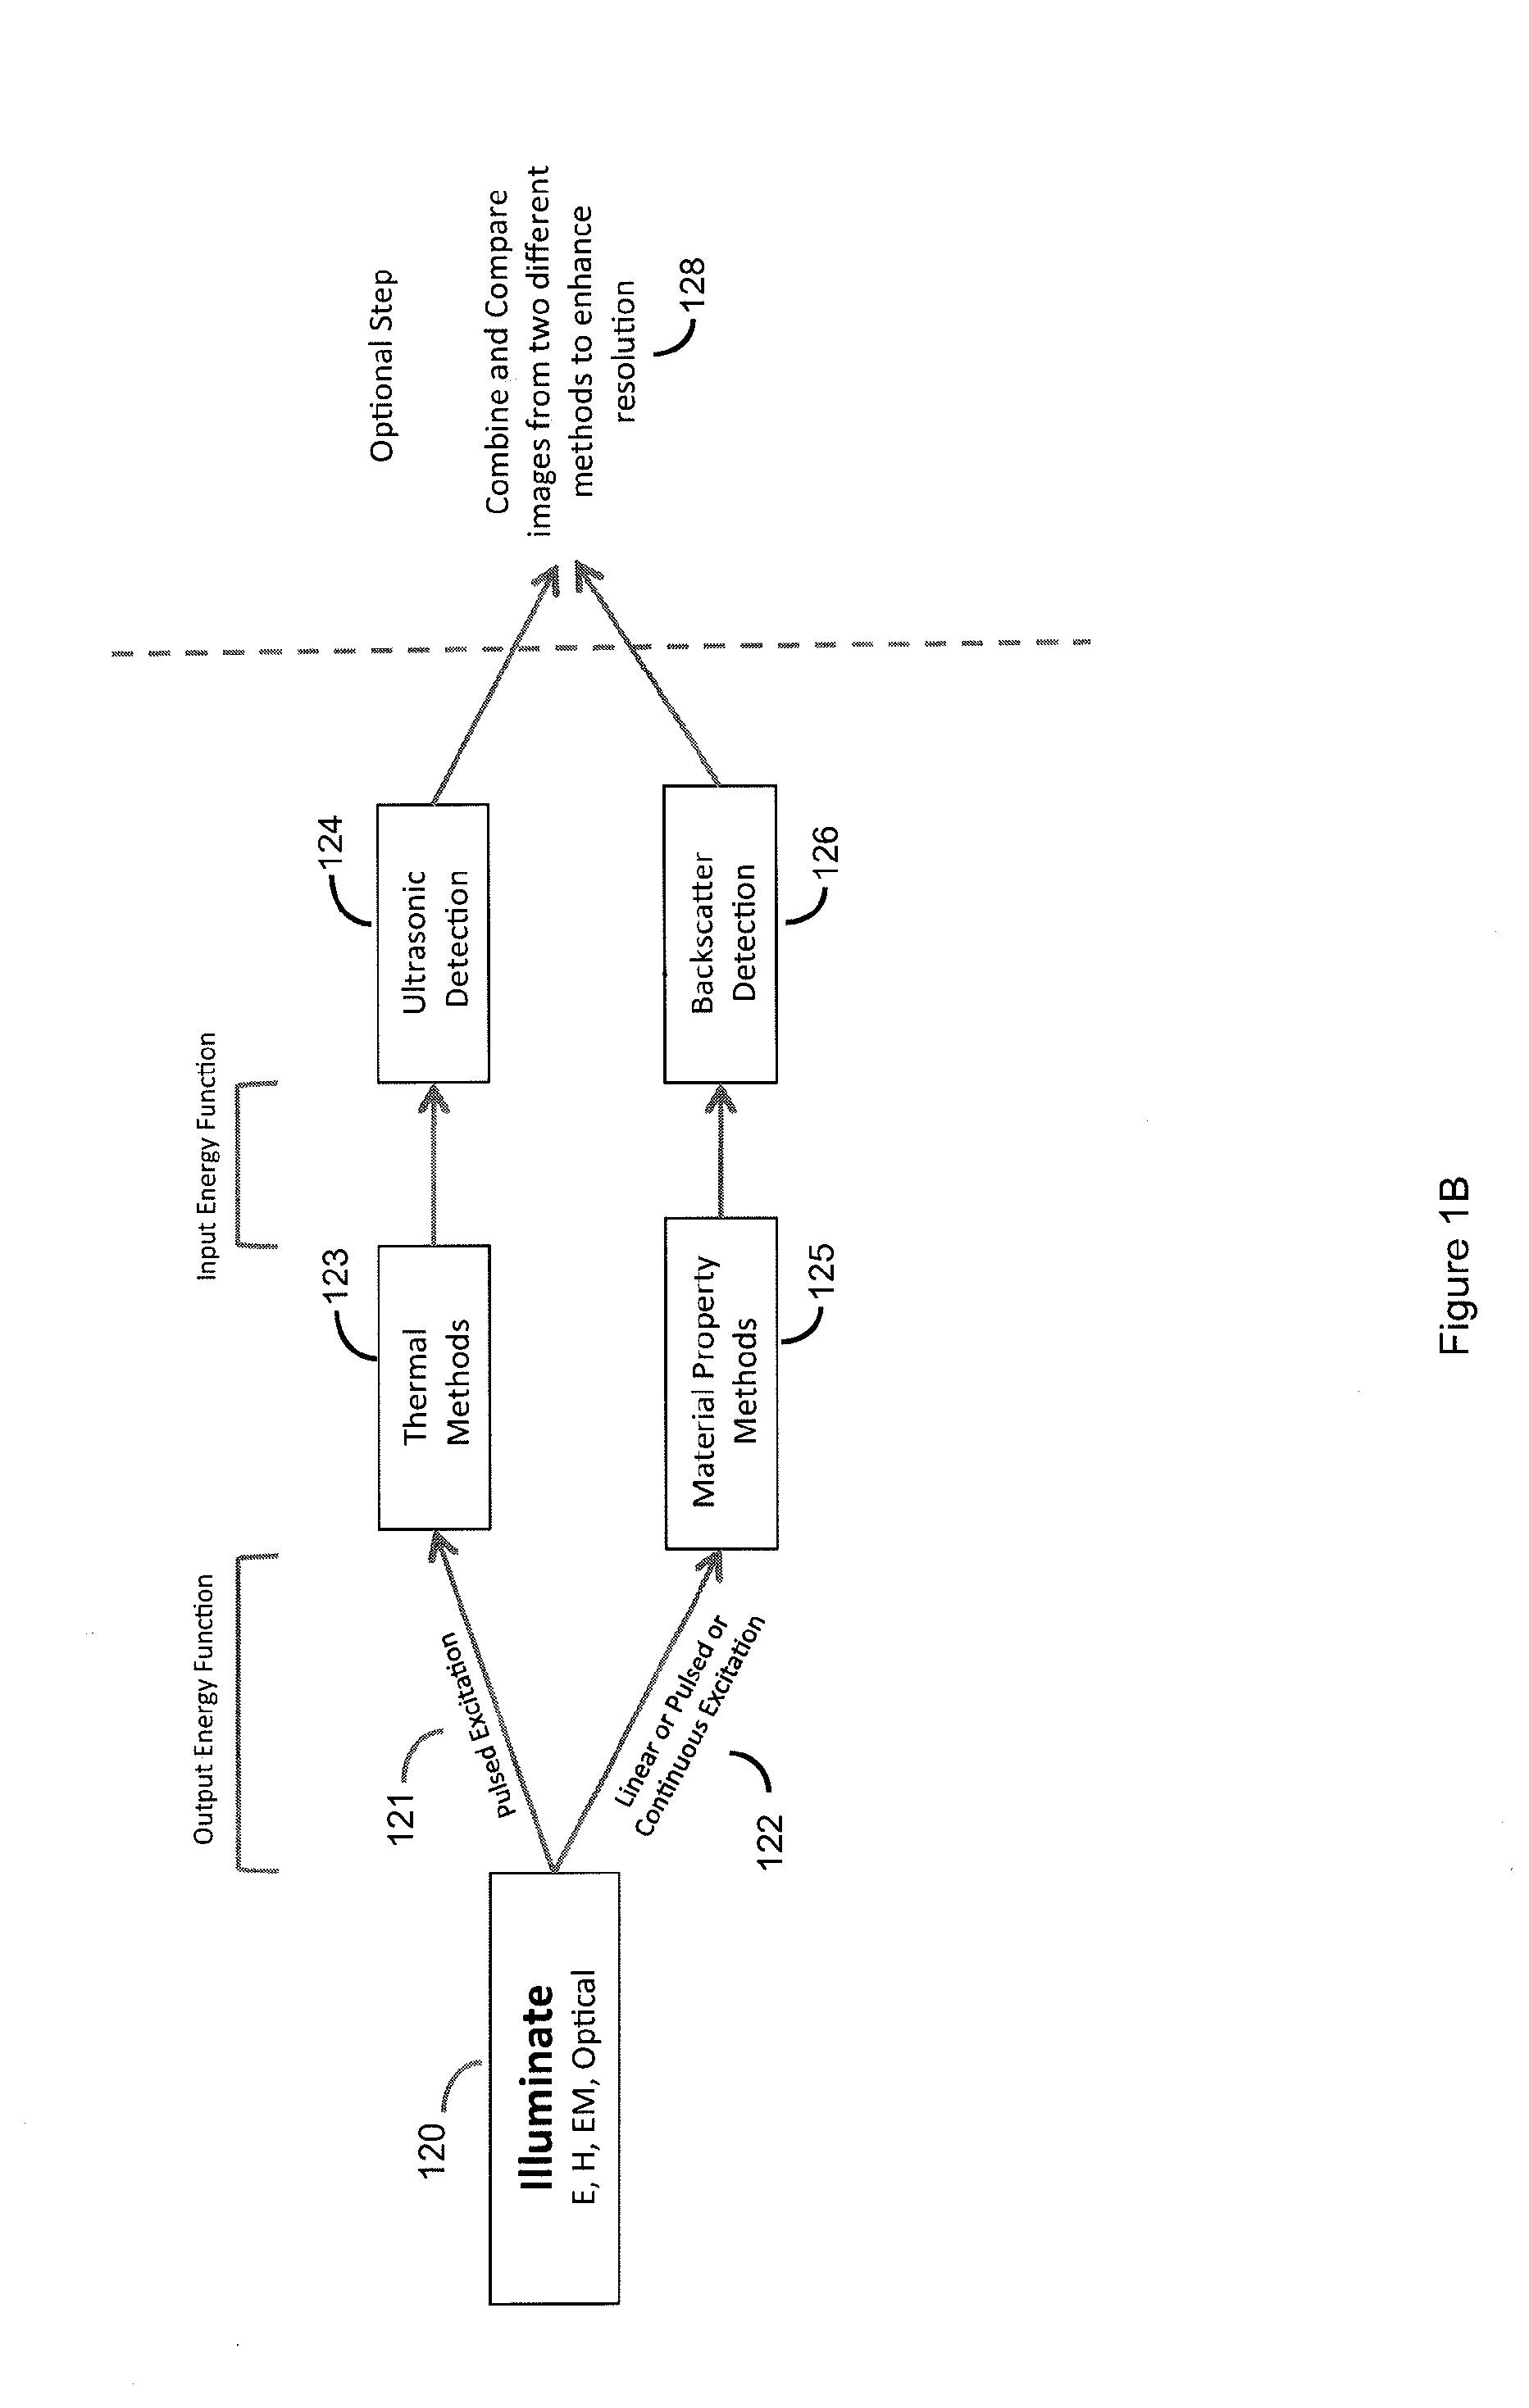 System for automatically amending energy field characteristics in the application of an energy field to a living organism for treatment of invasive agents